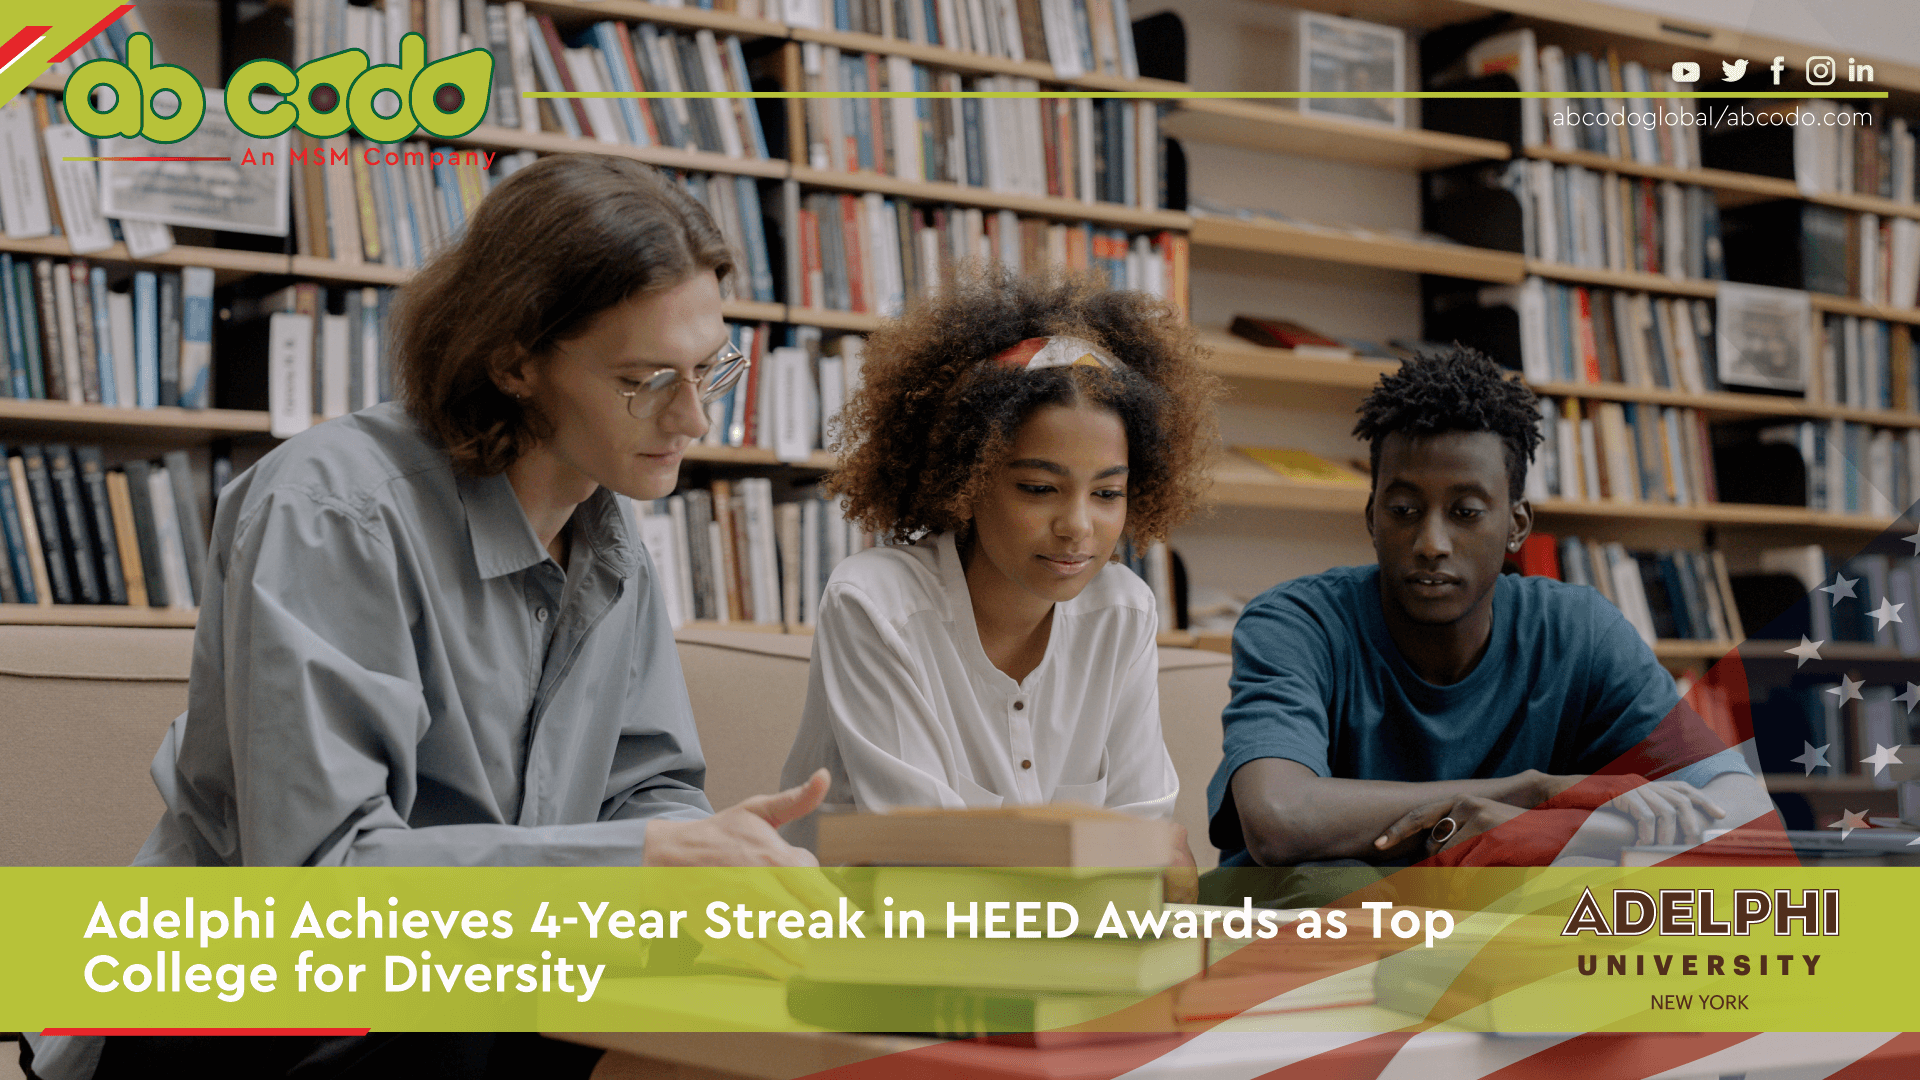 Adelphi Achieves 4-Year Streak in HEED Awards as Top College for Diversity